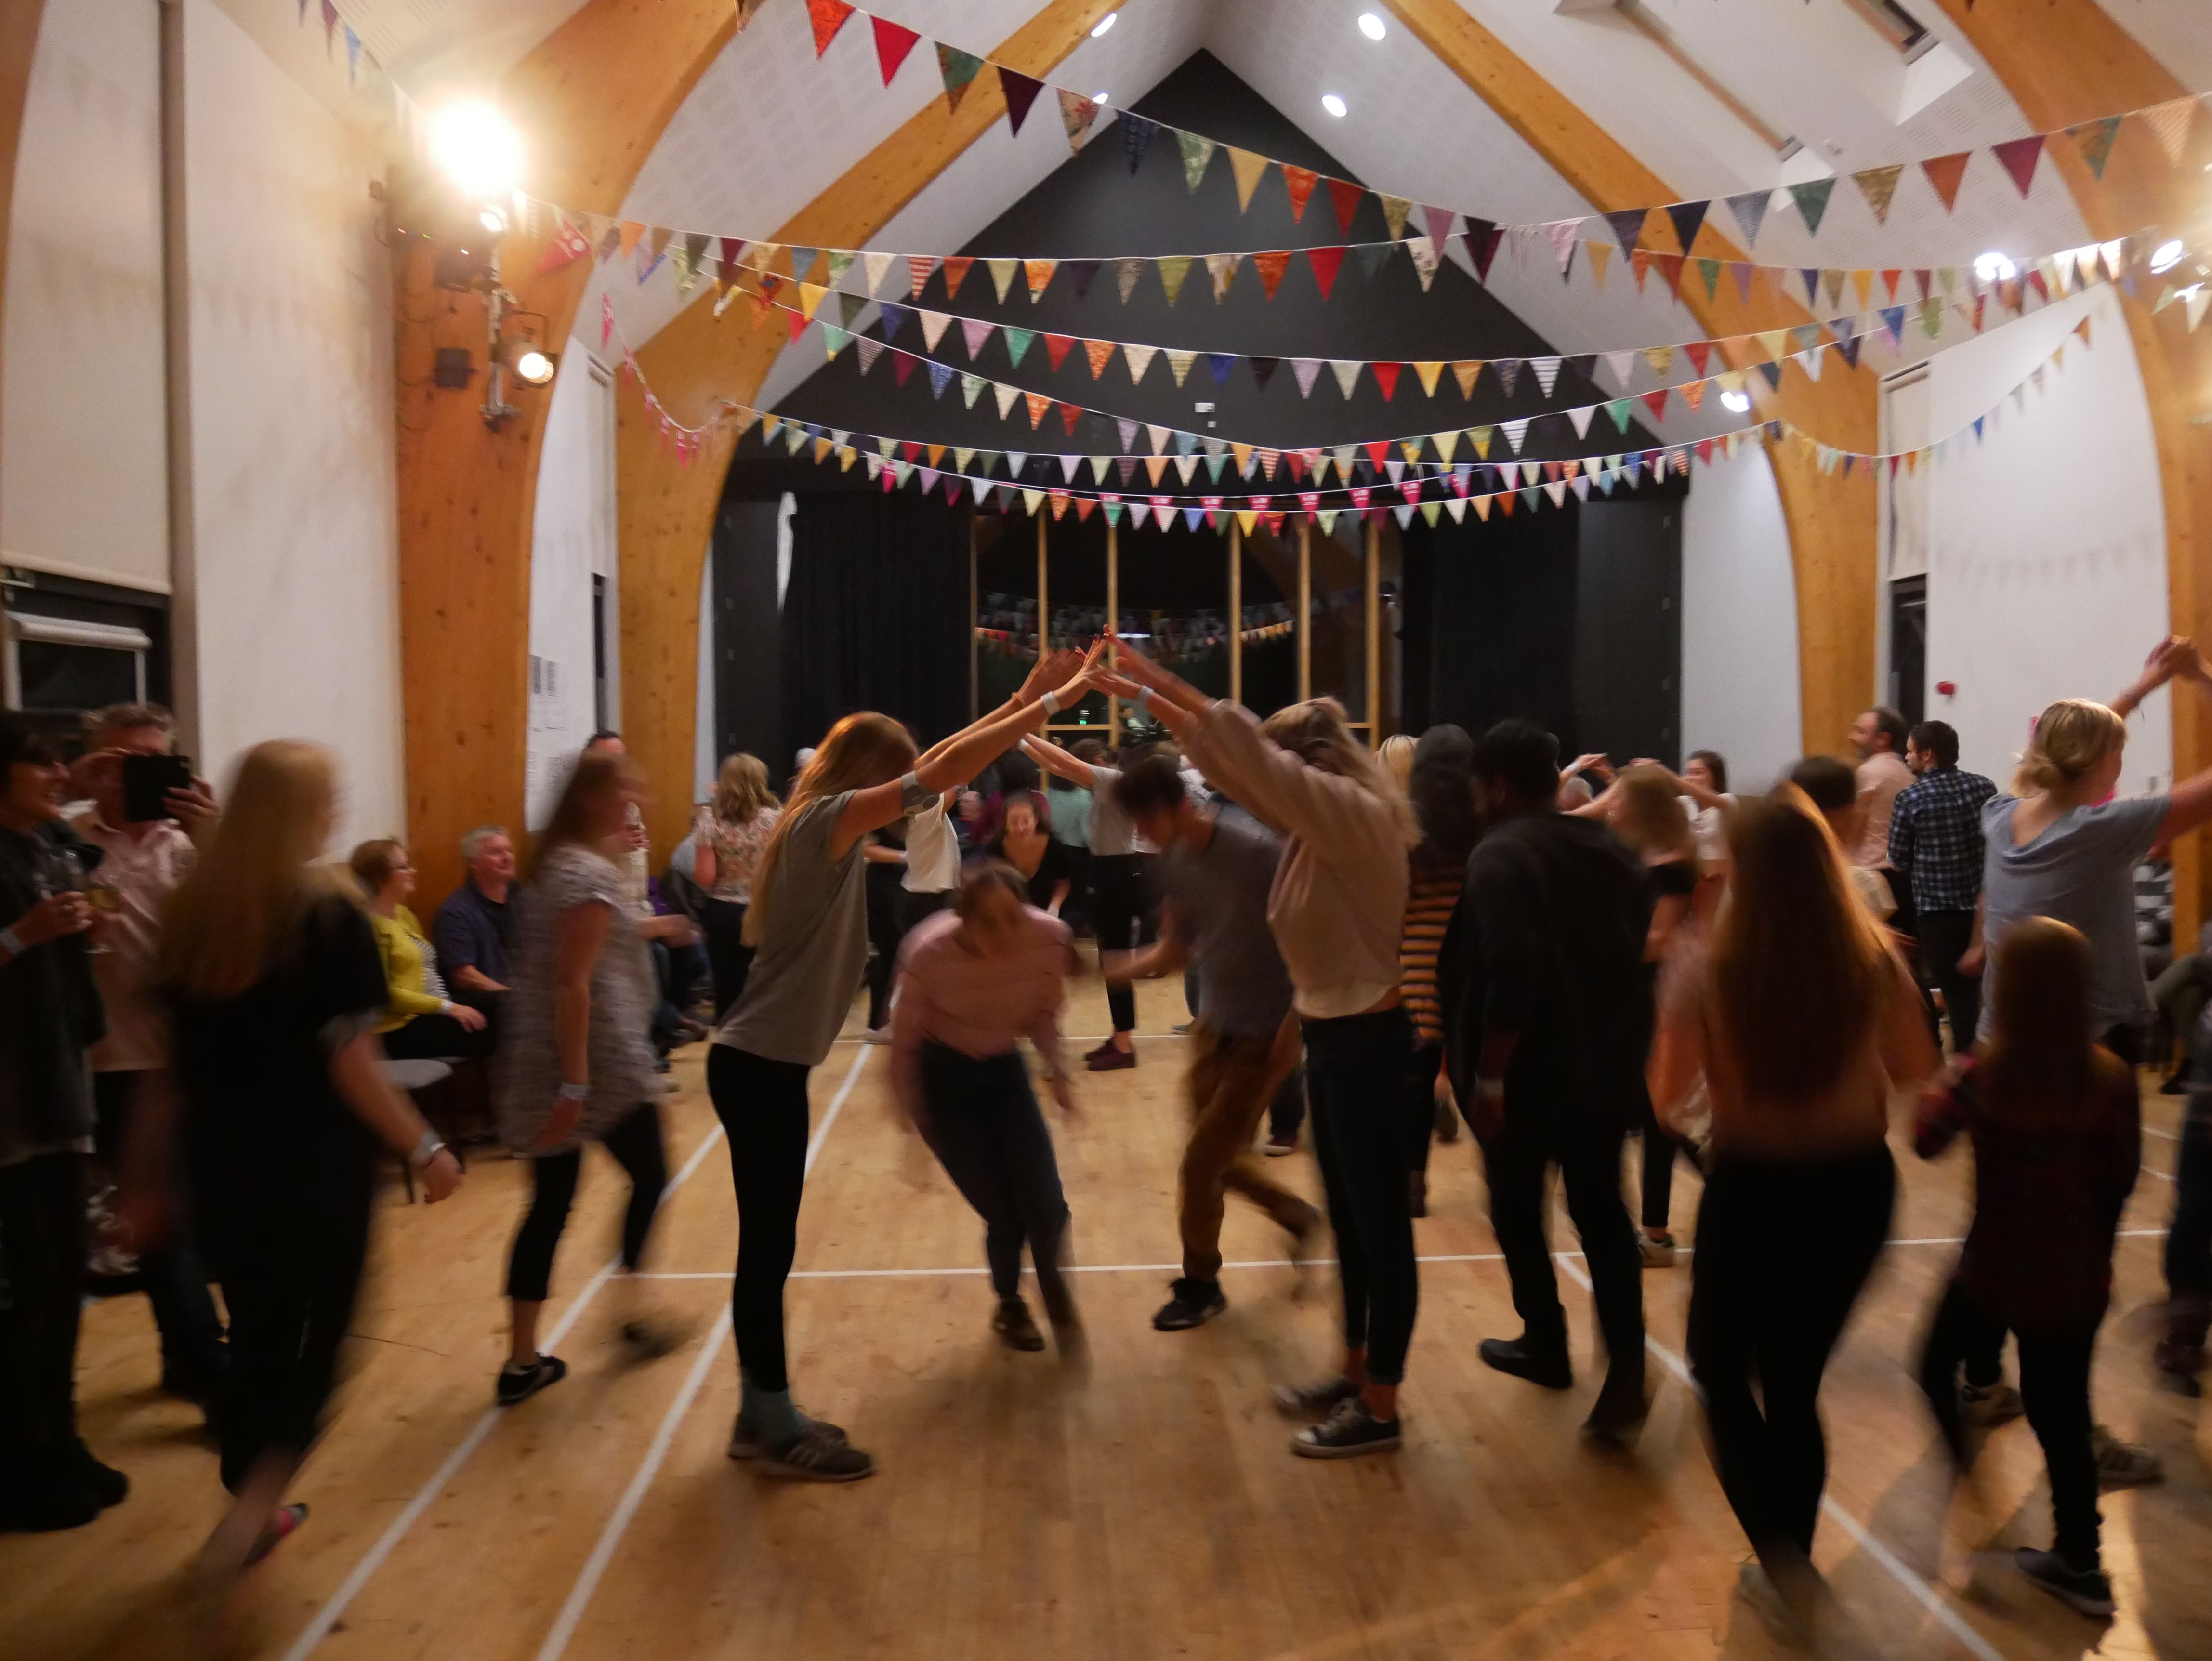 People dancing at a ceilidh